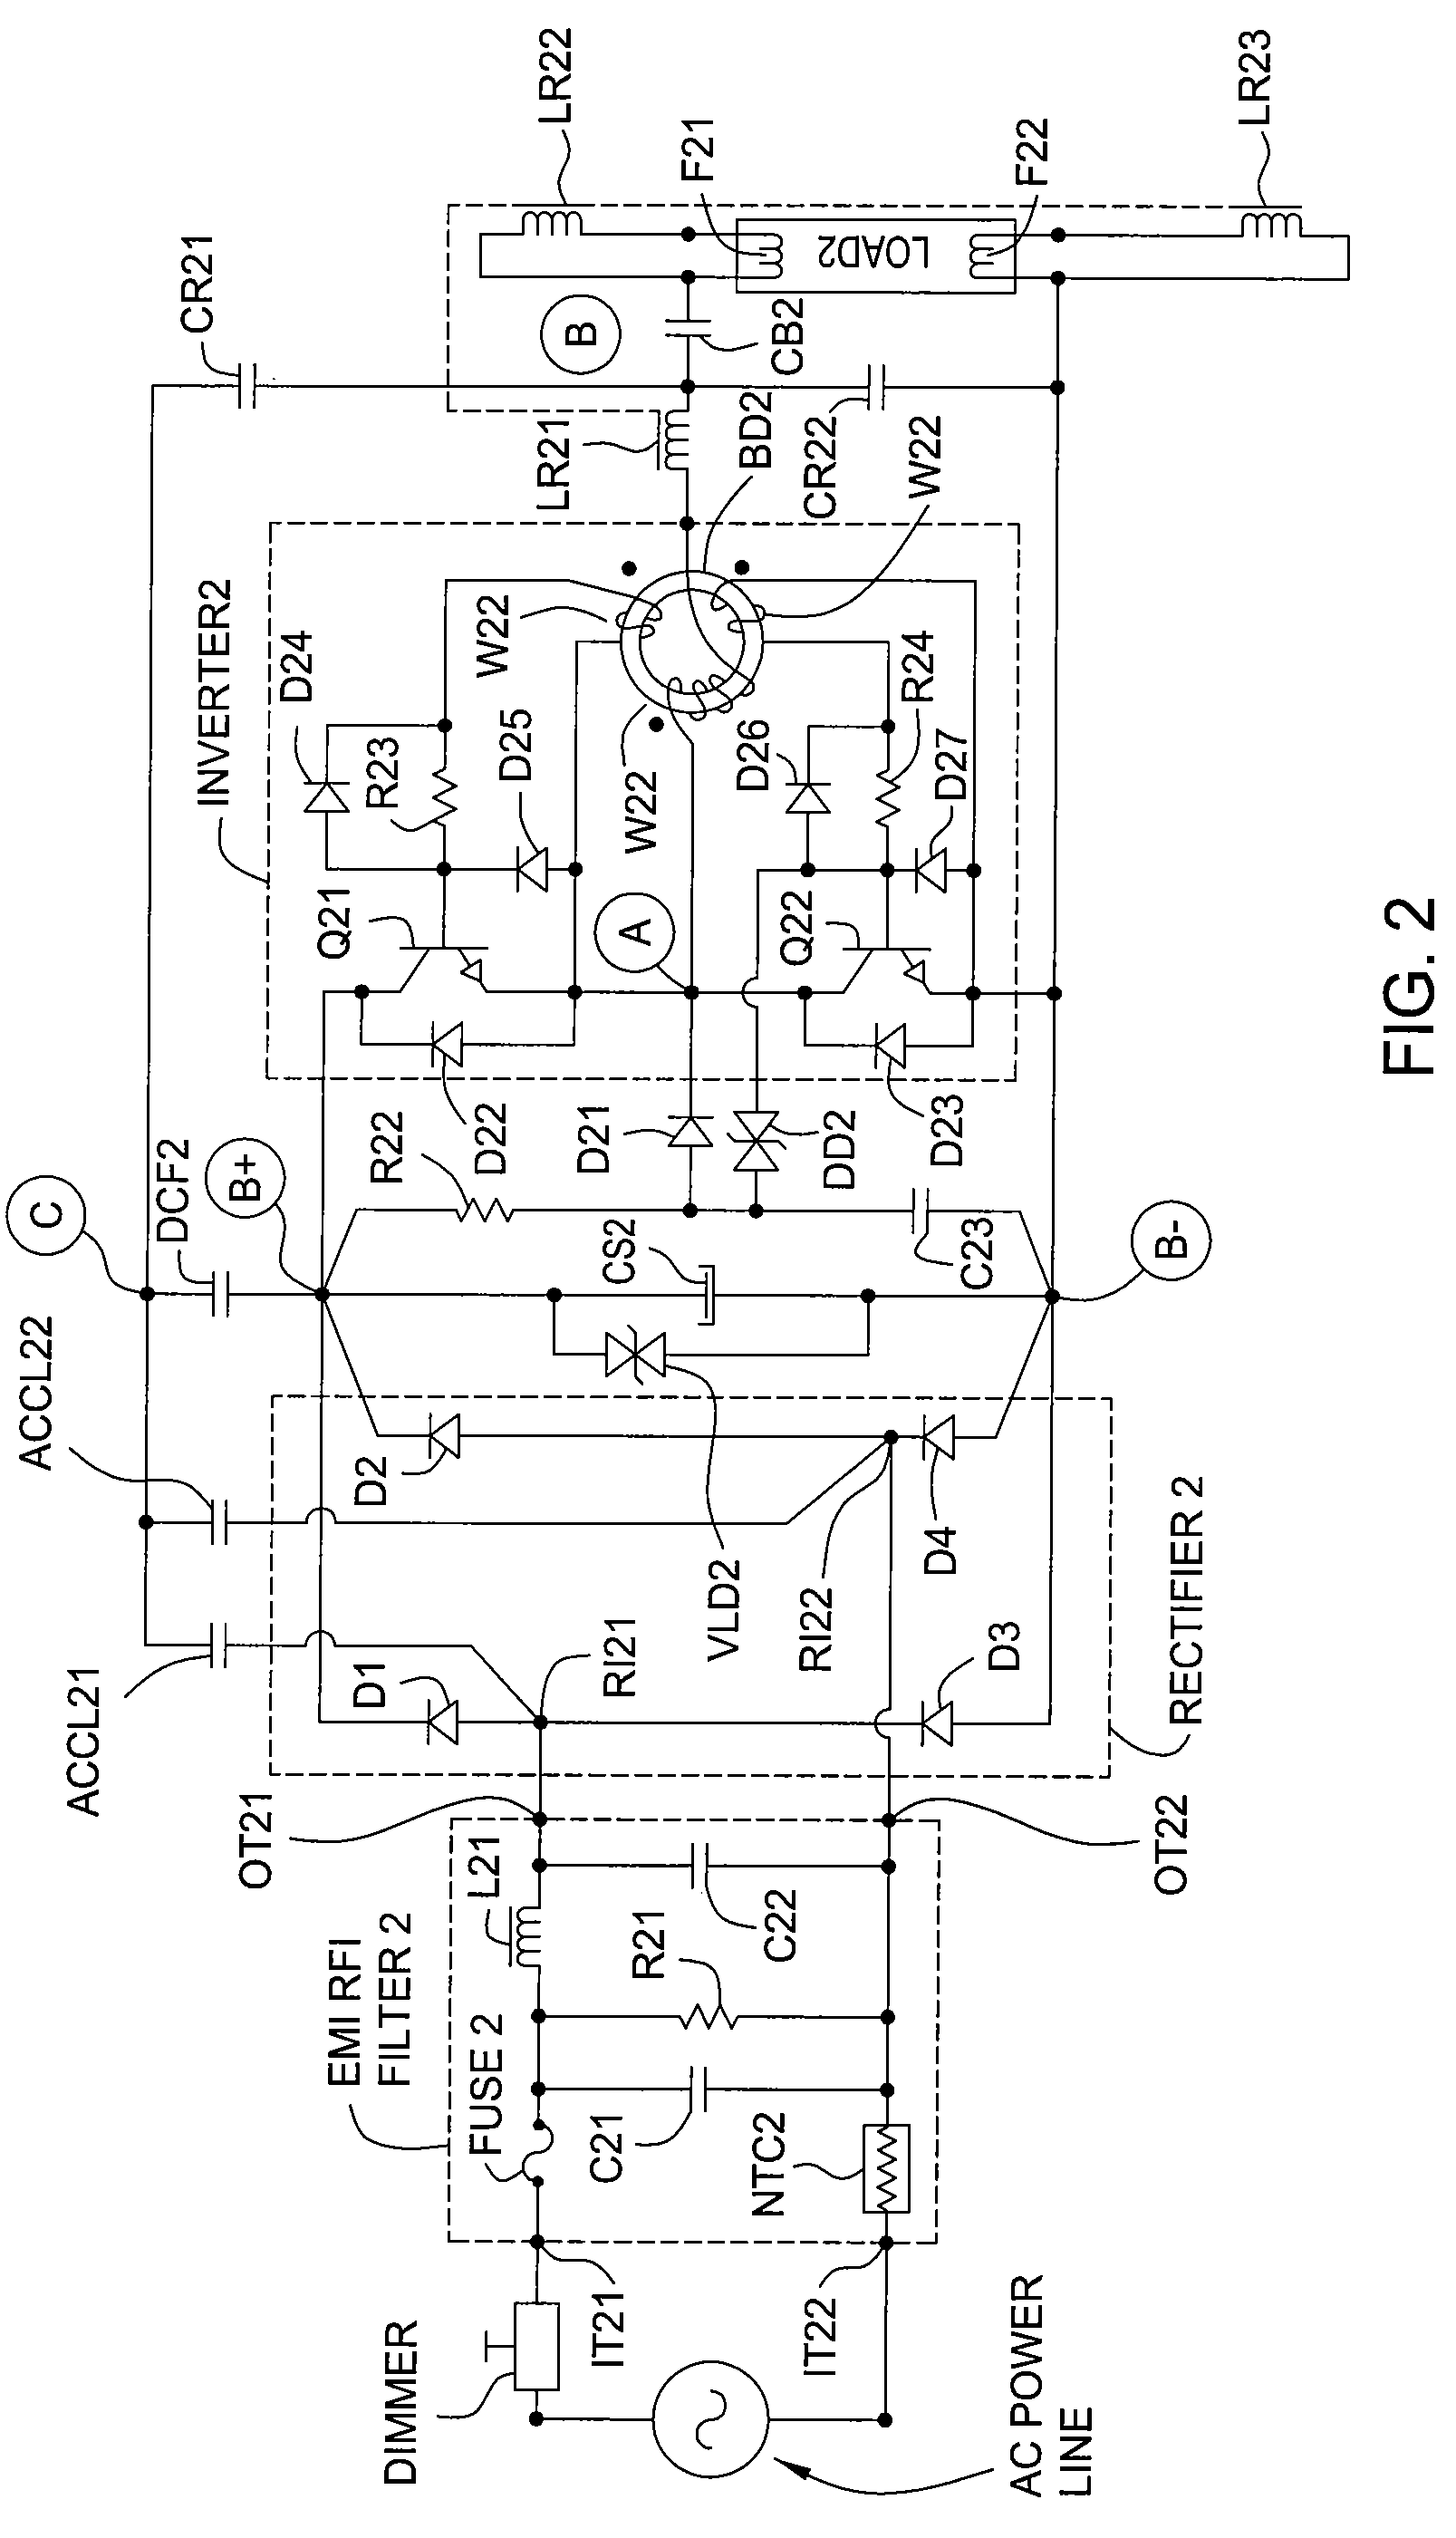 Apparatus and method enabling fully dimmable operation of a compact fluorescent lamp